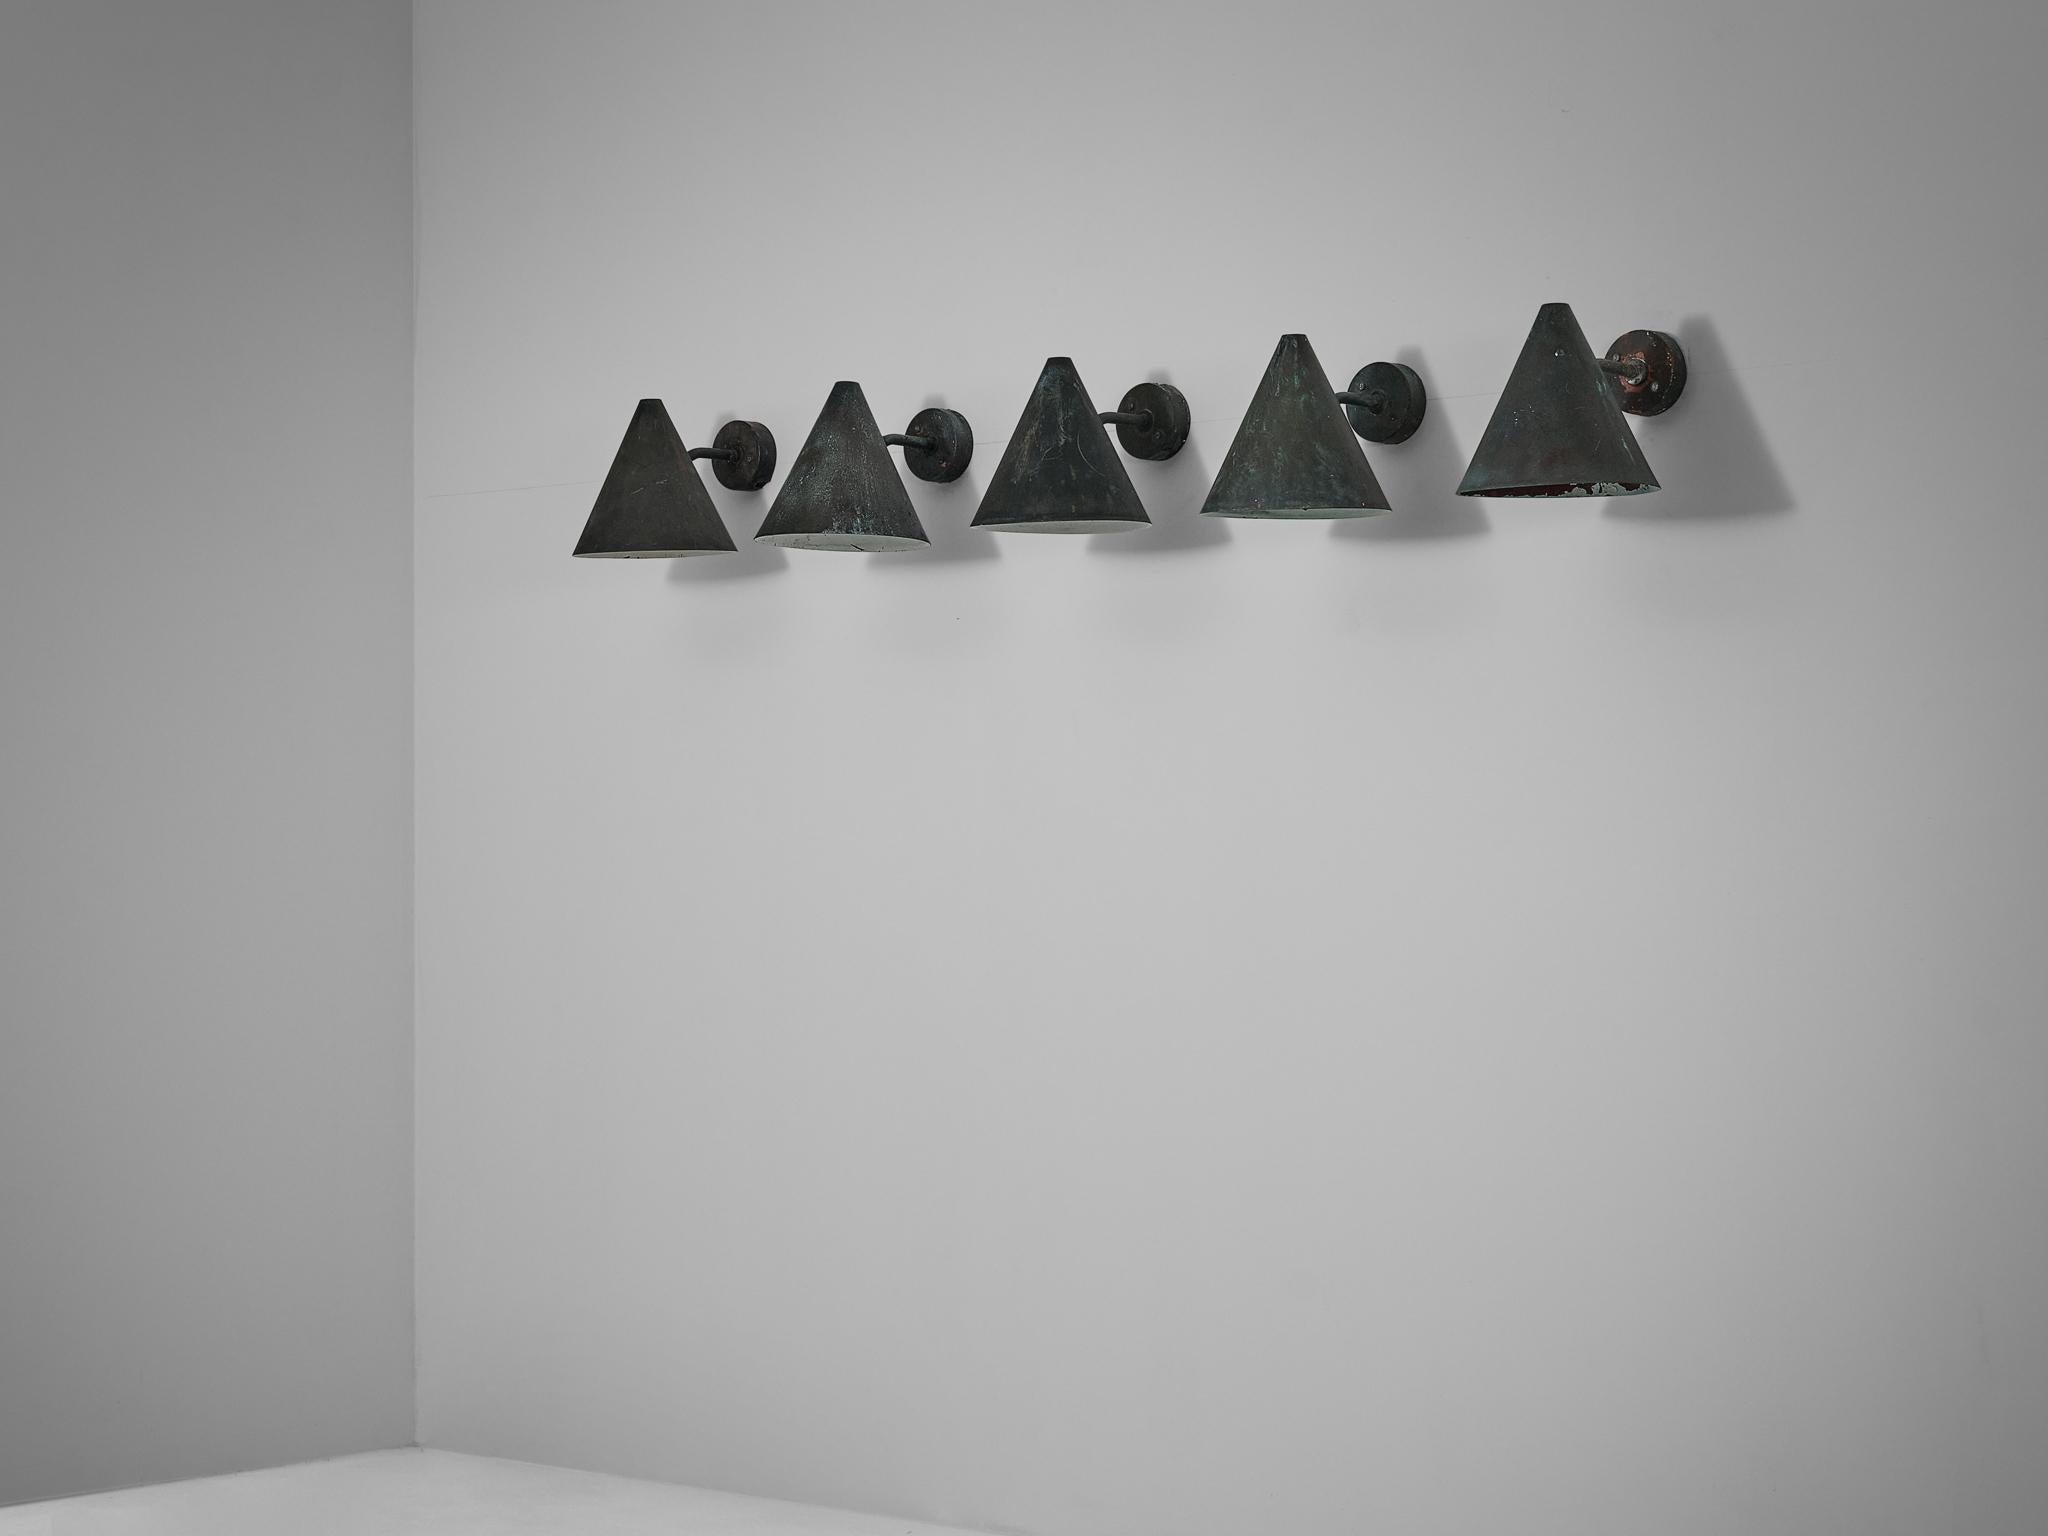  Hans-Agne Jakobsson 'Tratten' Wall Lights in Patinated Copper  5